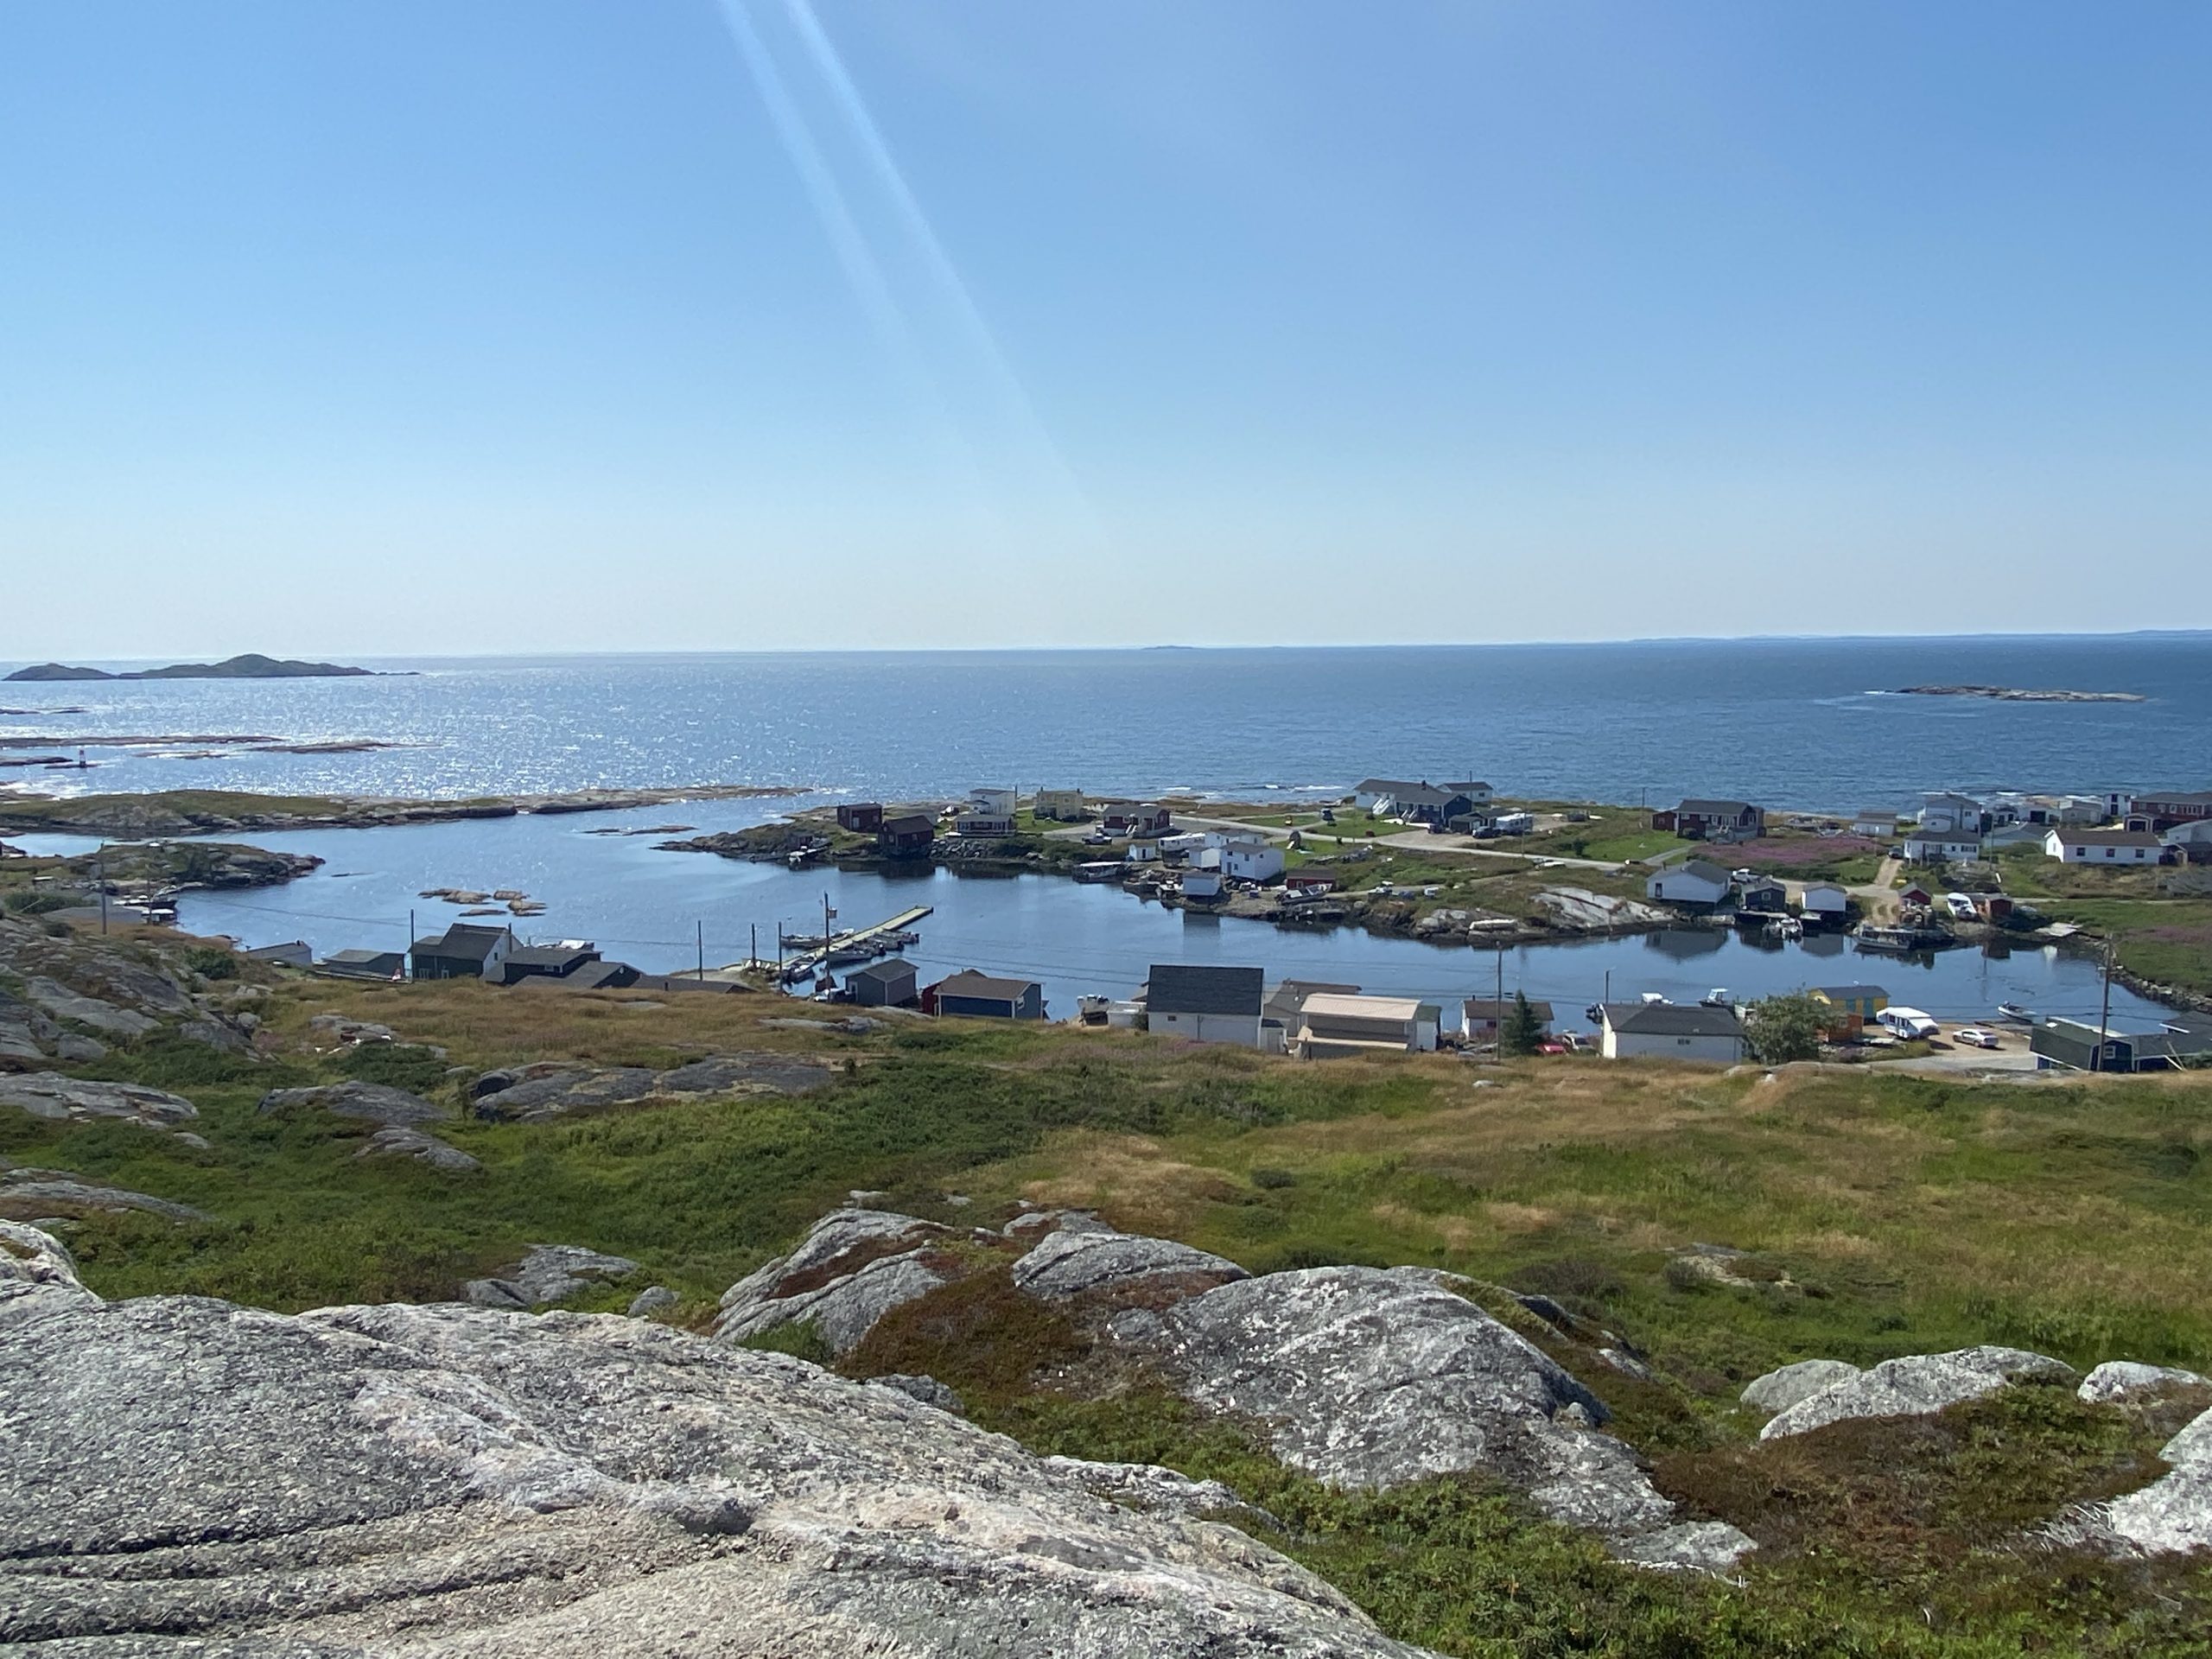 A view of the village of Greenspond, on Wings Island in Newfoundland.